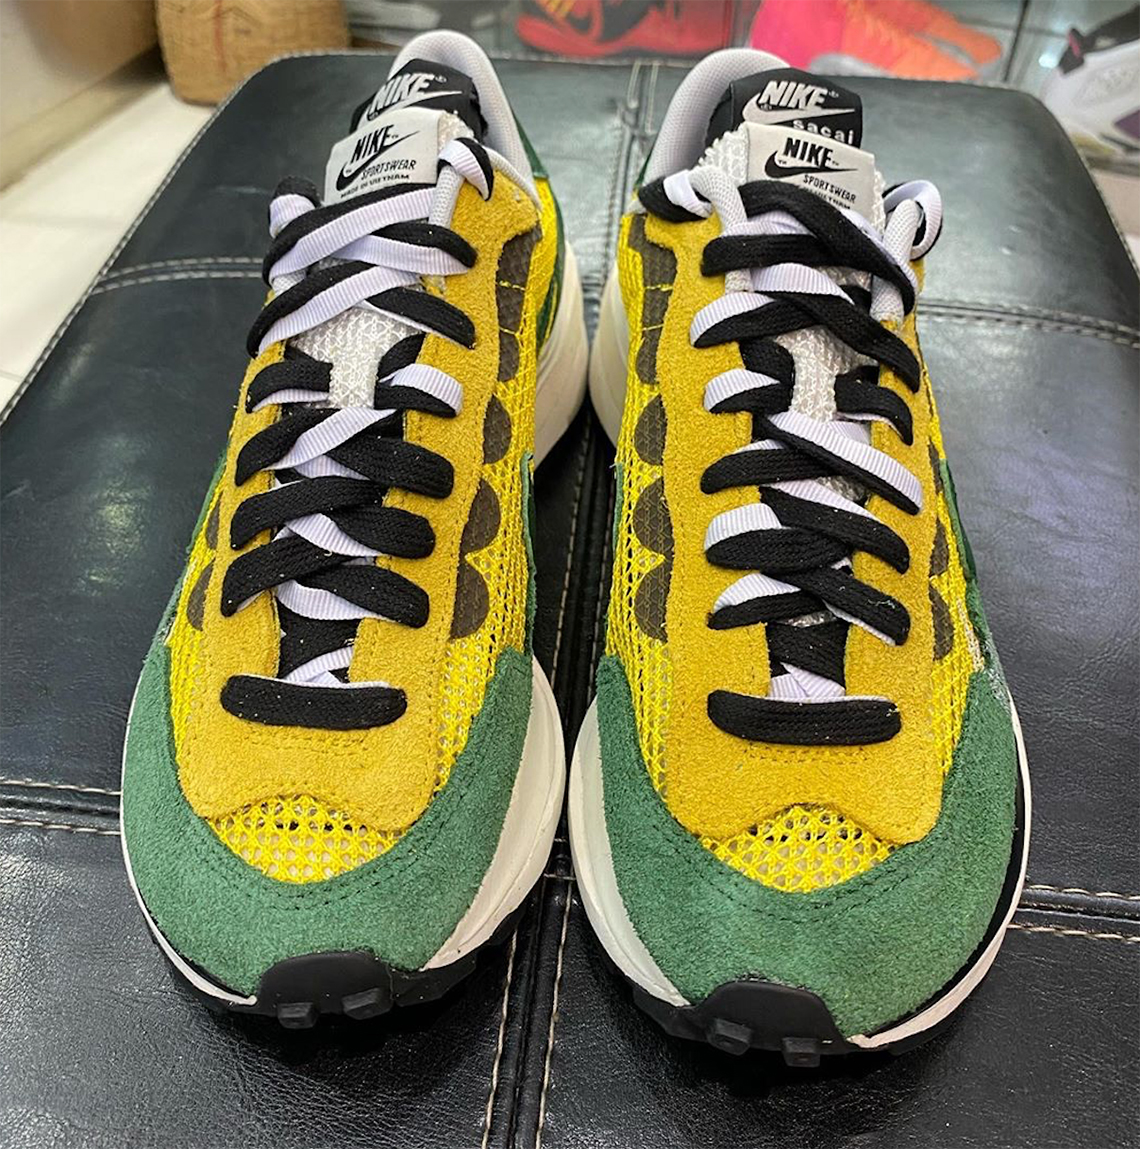 Early Look: New Images of sacai x Nike Vapor Waffle, Three Colorways